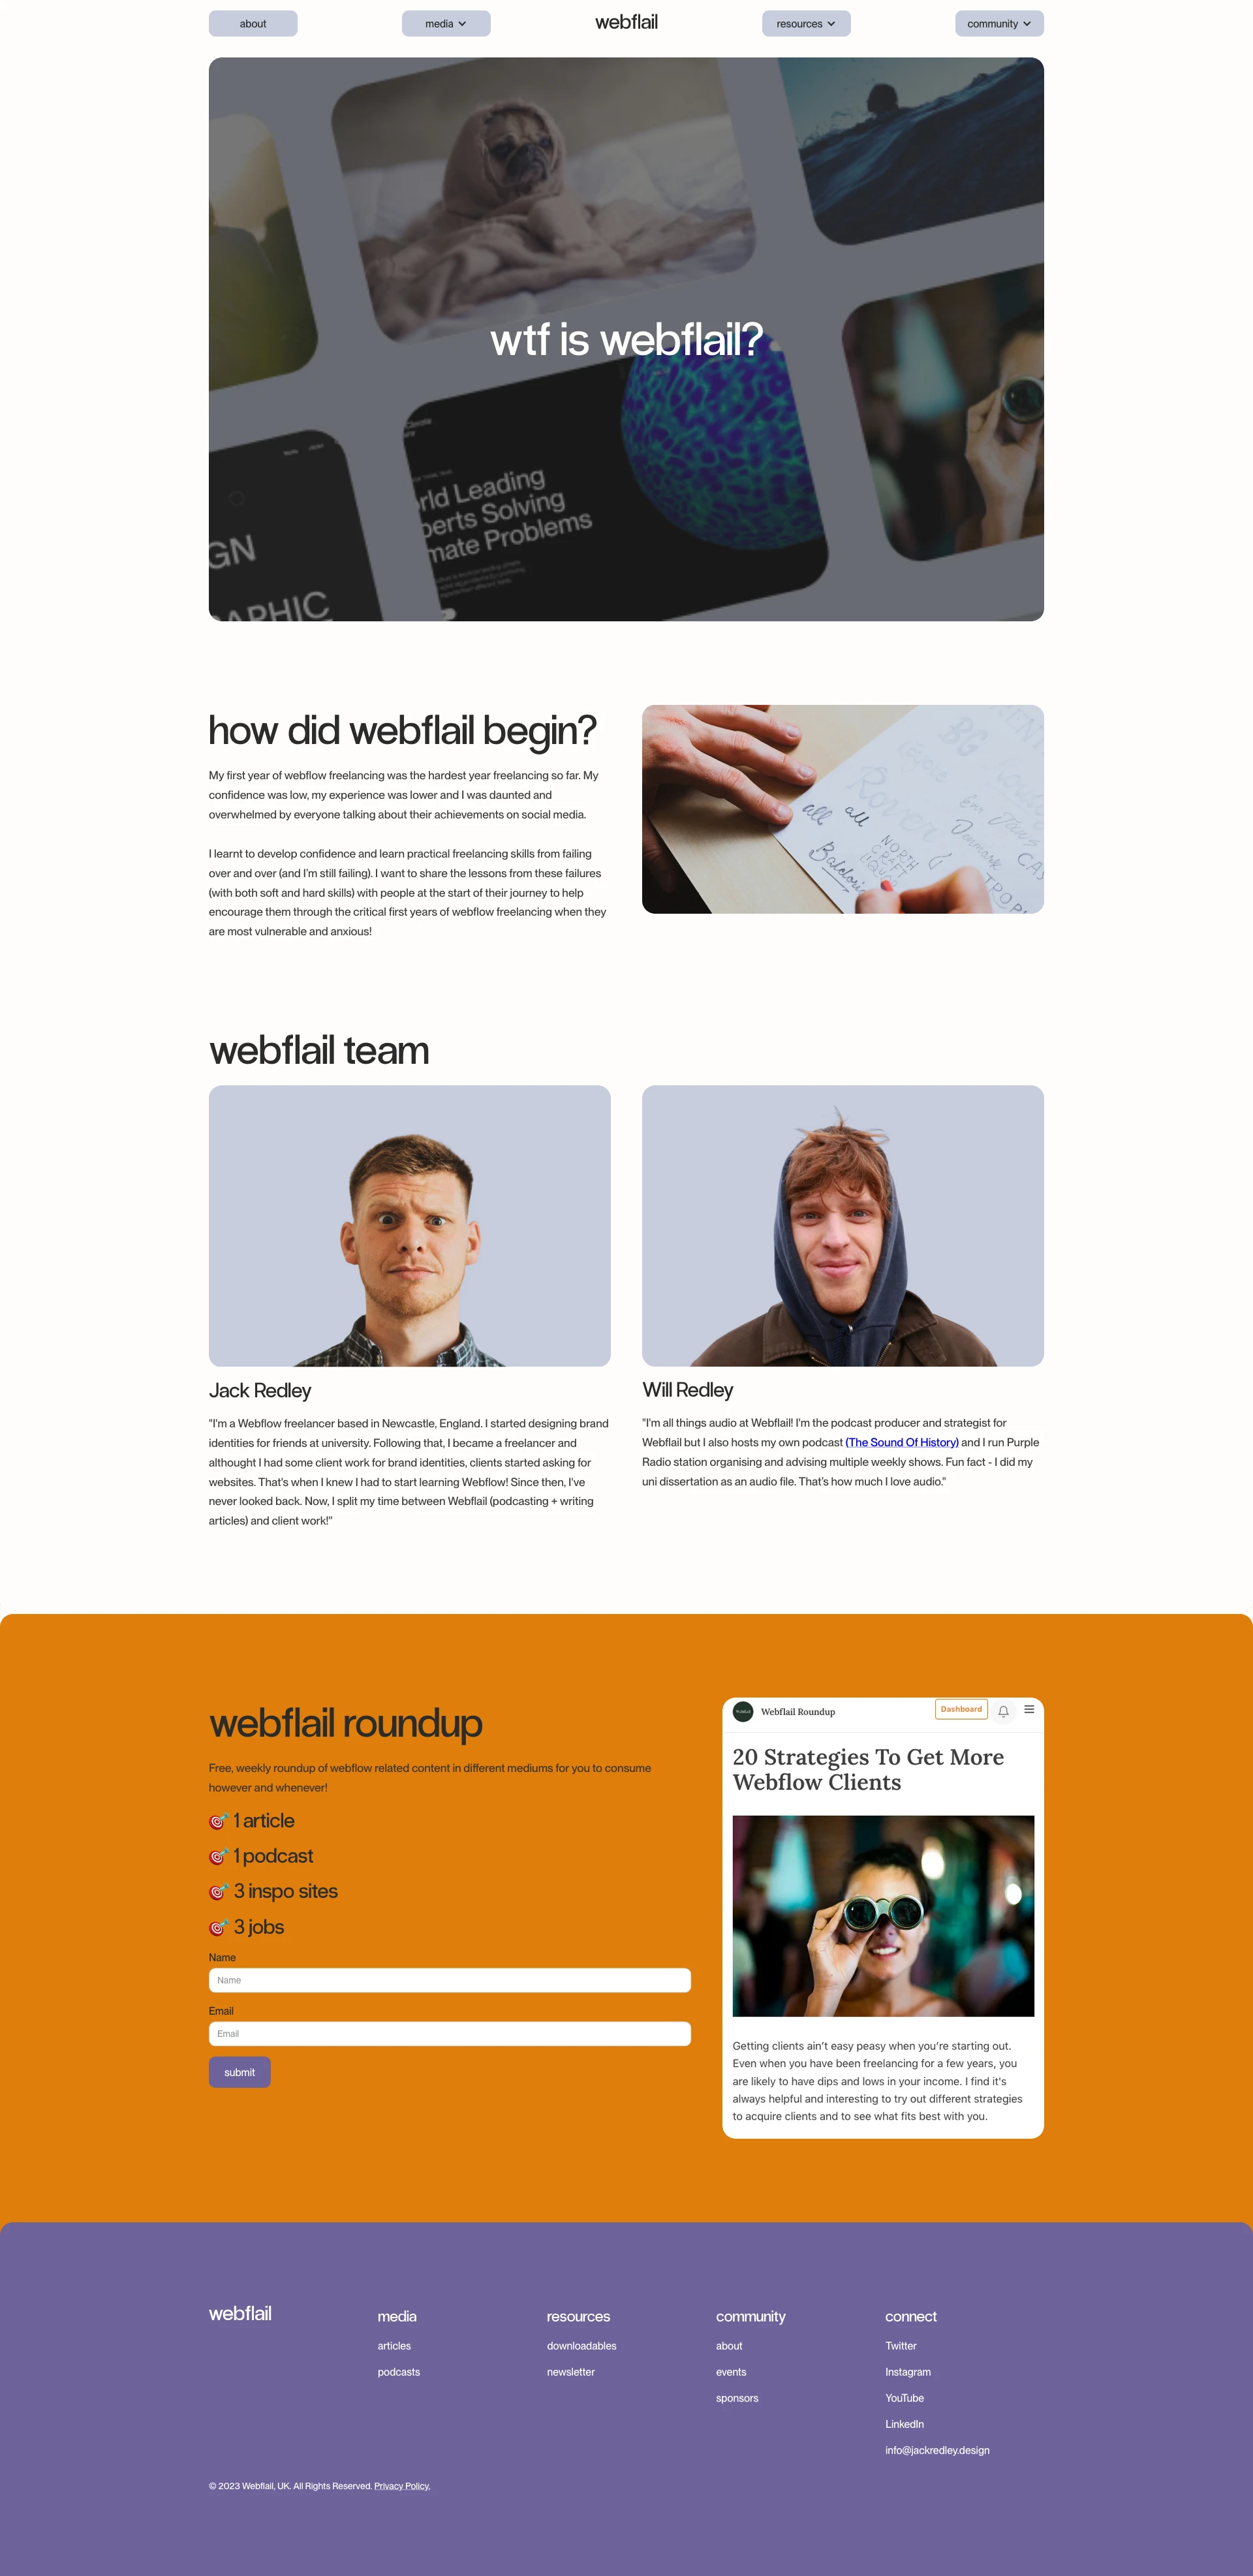 Webflail Landing Page Example: Webflow resources for beginner Webflowers. Webflail helps you to freelance, learn from failures, gain confience and pick up practical tips & tricks to succeed.